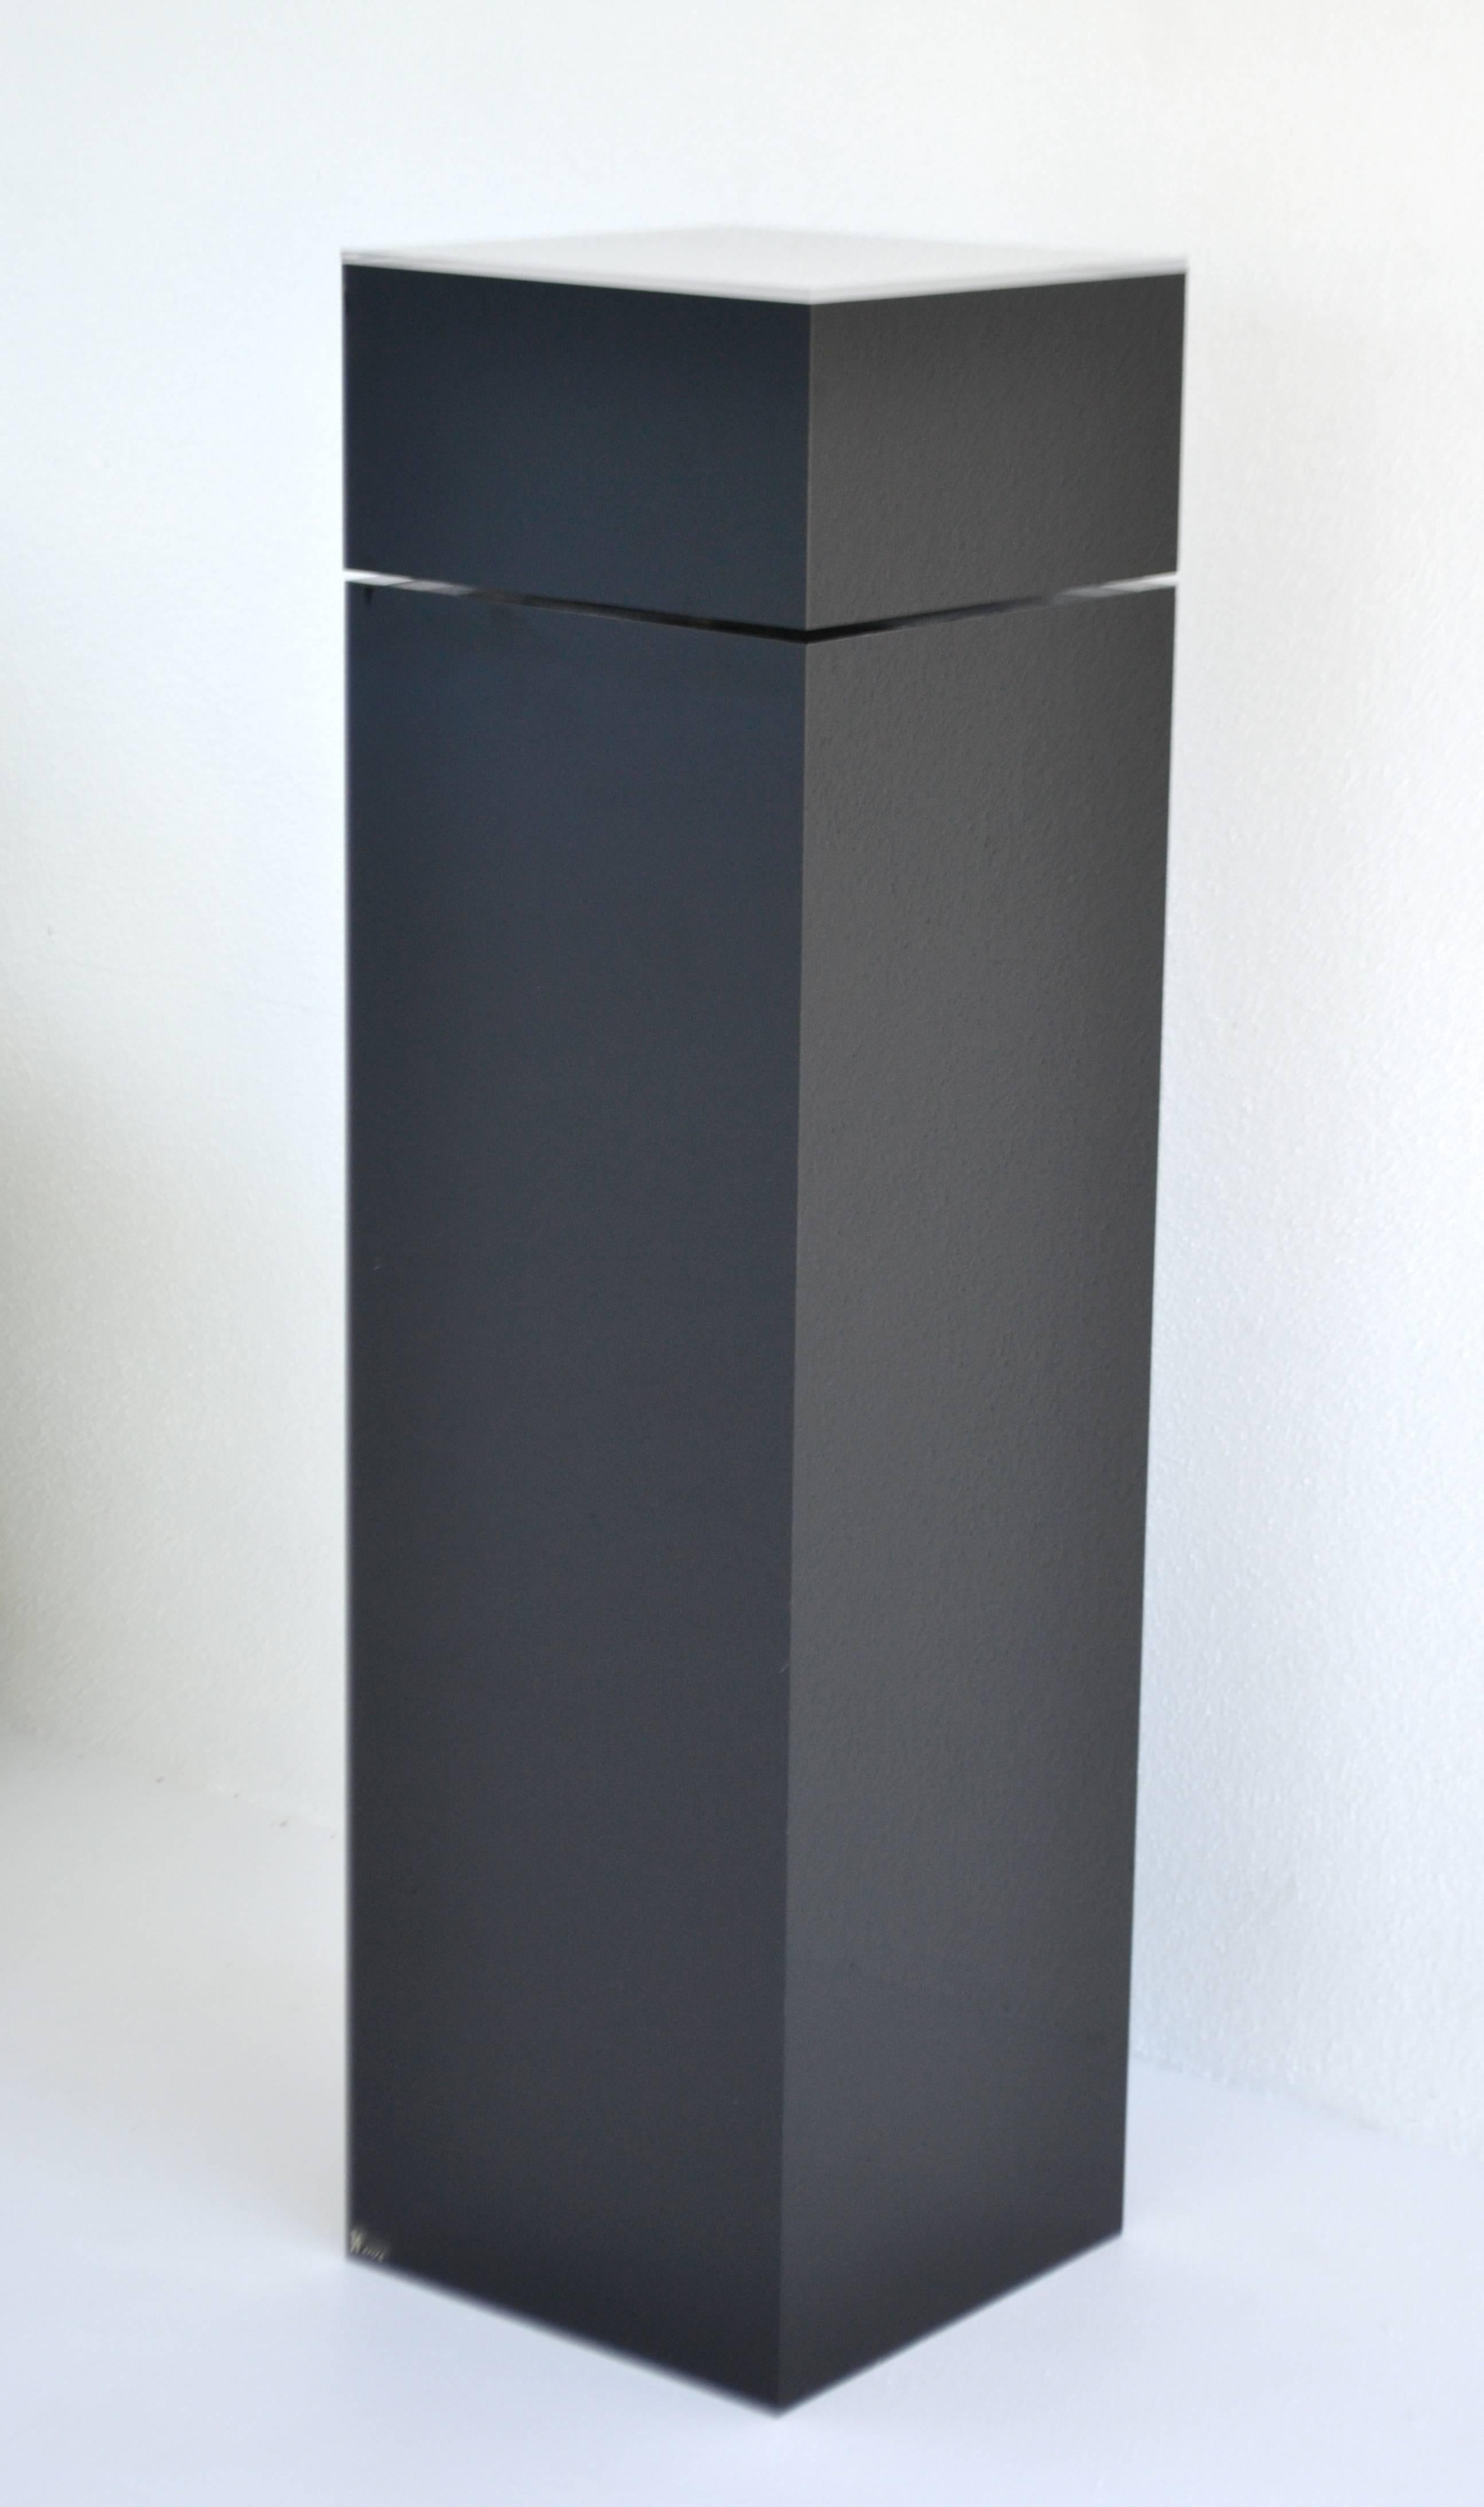 Sculptural Postmodern custom handmade black Lucite pedestal by Haziza, circa 1980s. The rotating top of this stunning pedestal is illuminated by an interior light fixture which creates uplighting.